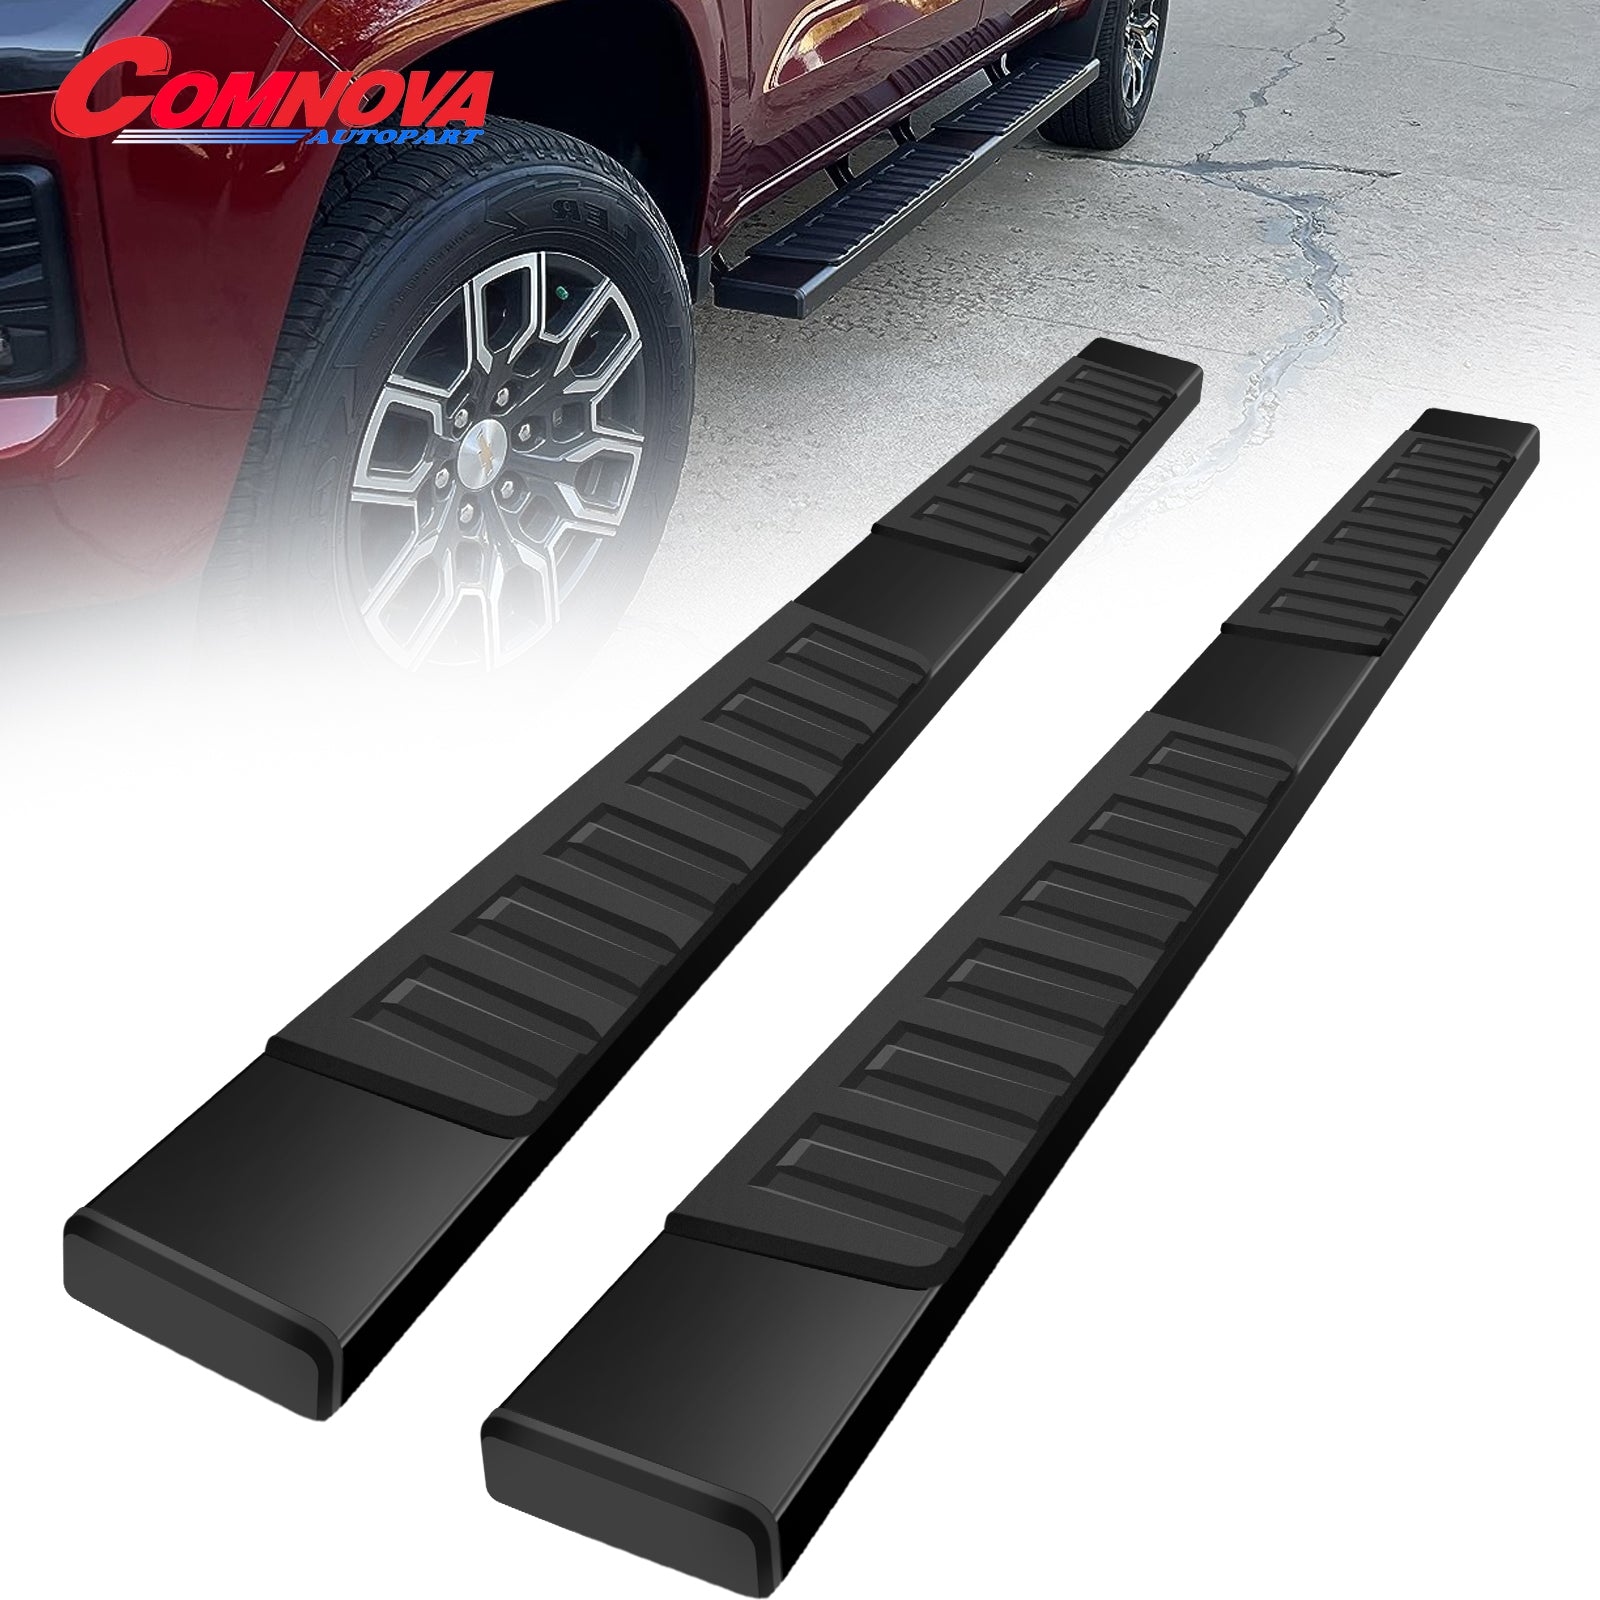 Running Boards Compatible with 1999-2016 Ford F250 Superduty Crew Cab(4 Full Size Doors) Side Steps H6 Style. - COMNOVA AUTOPART